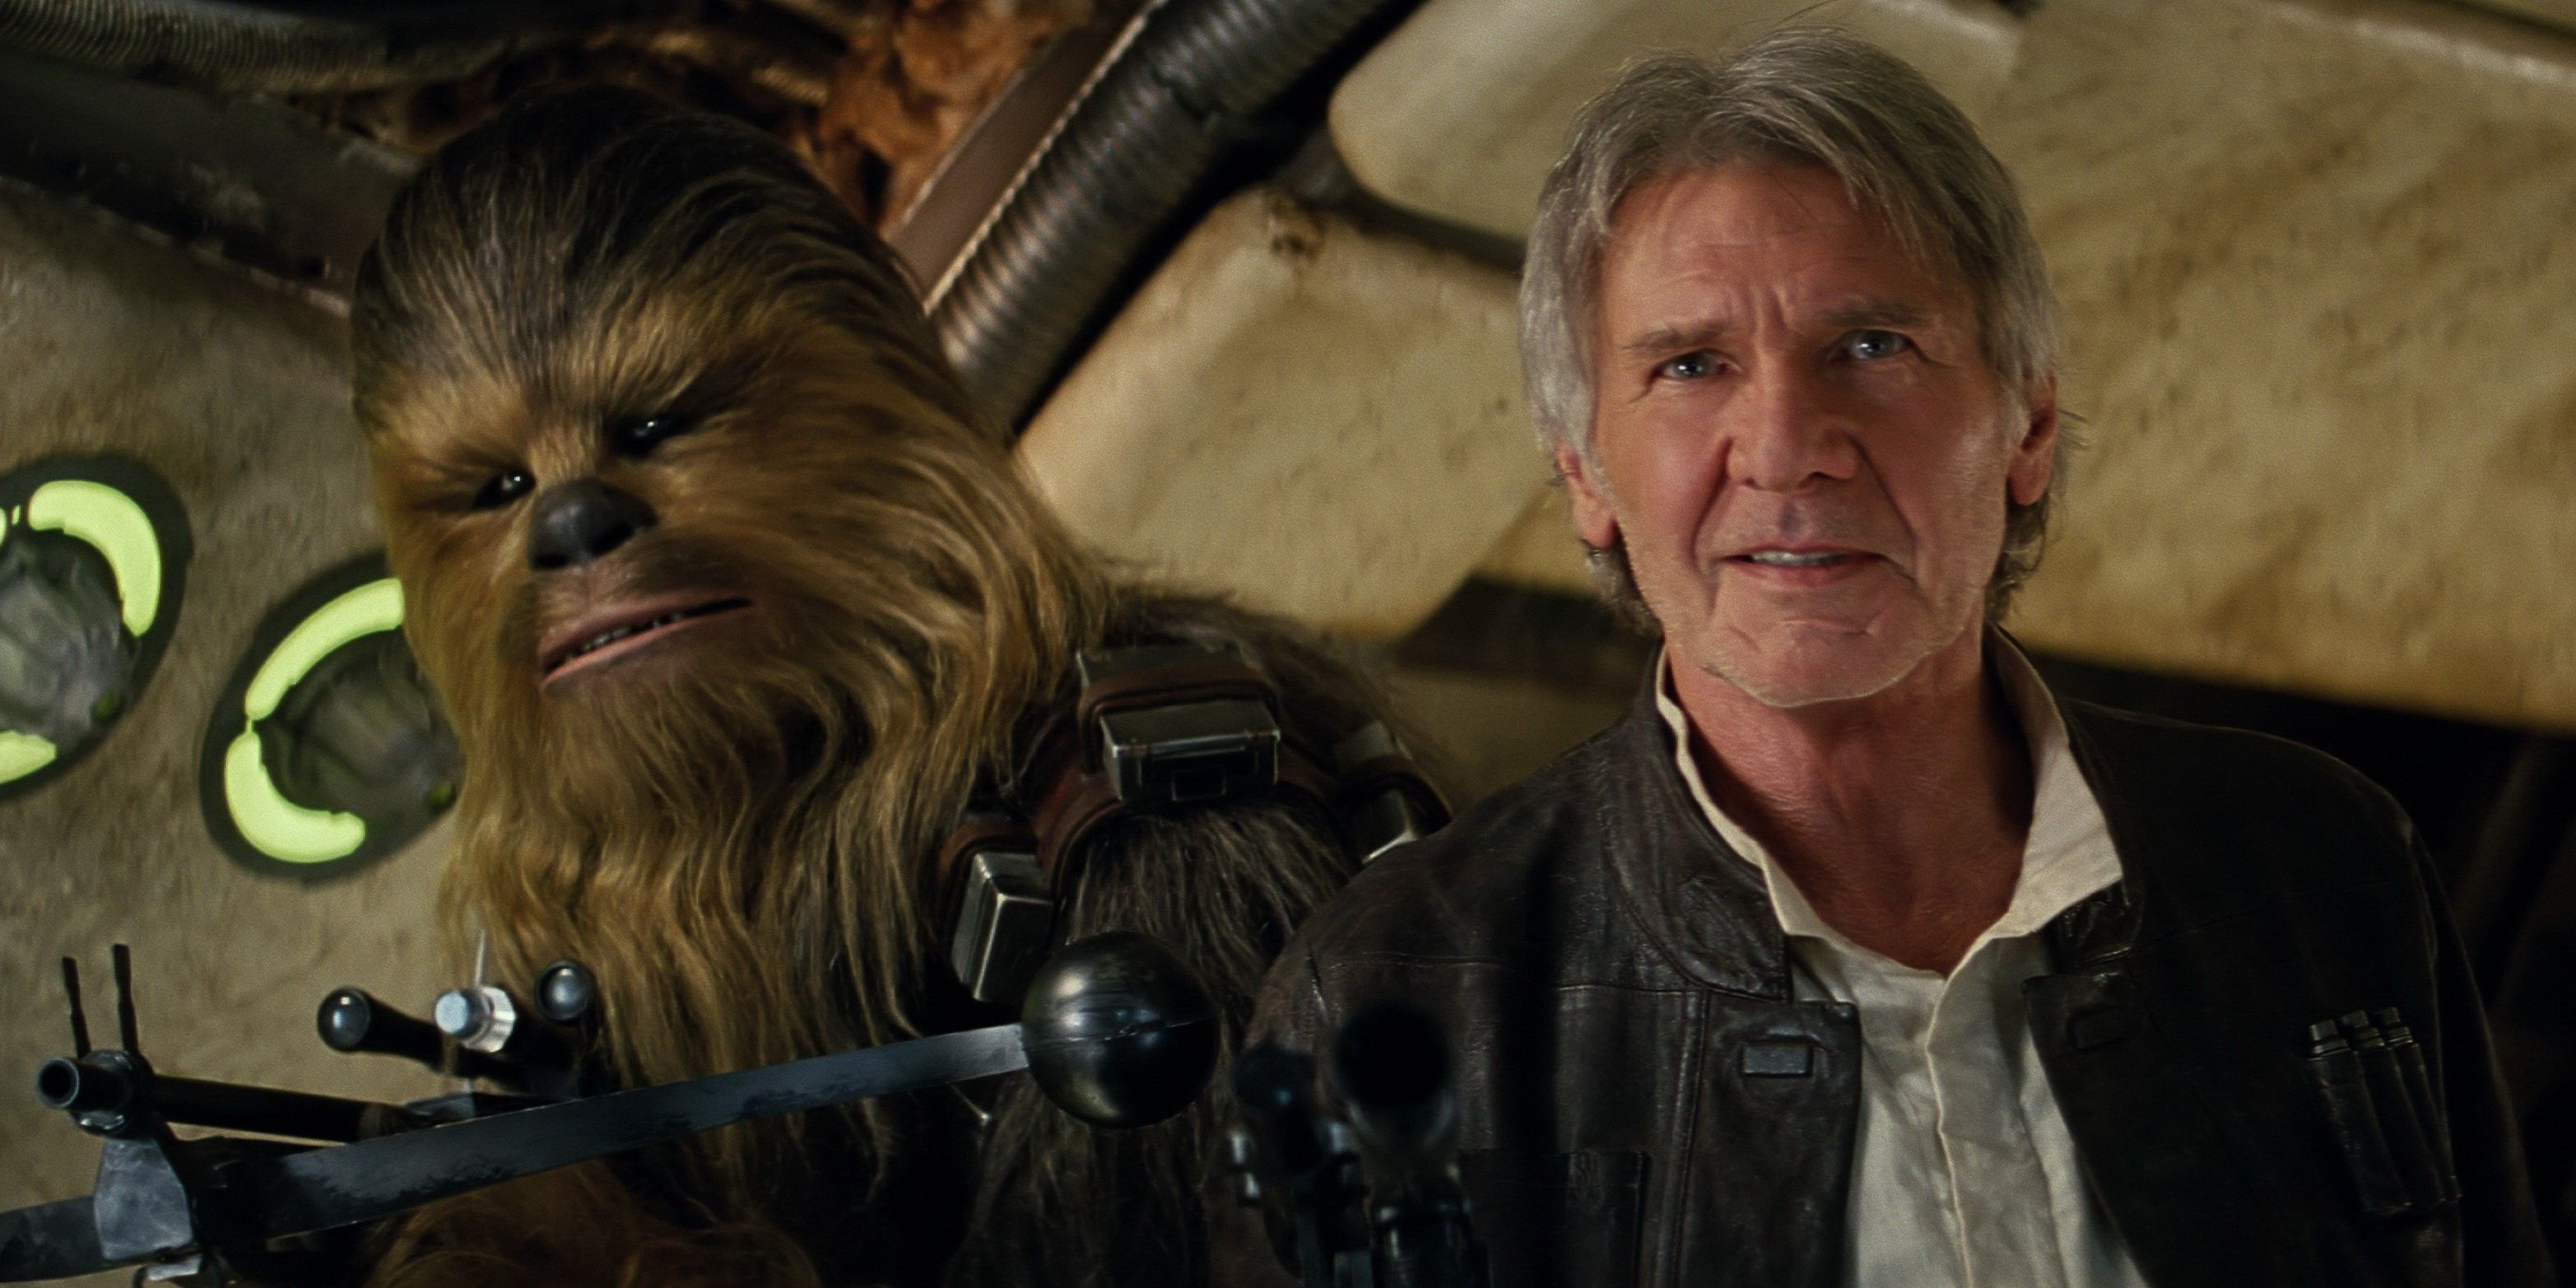 Han and Chewie in Star Wars The Force Awakens